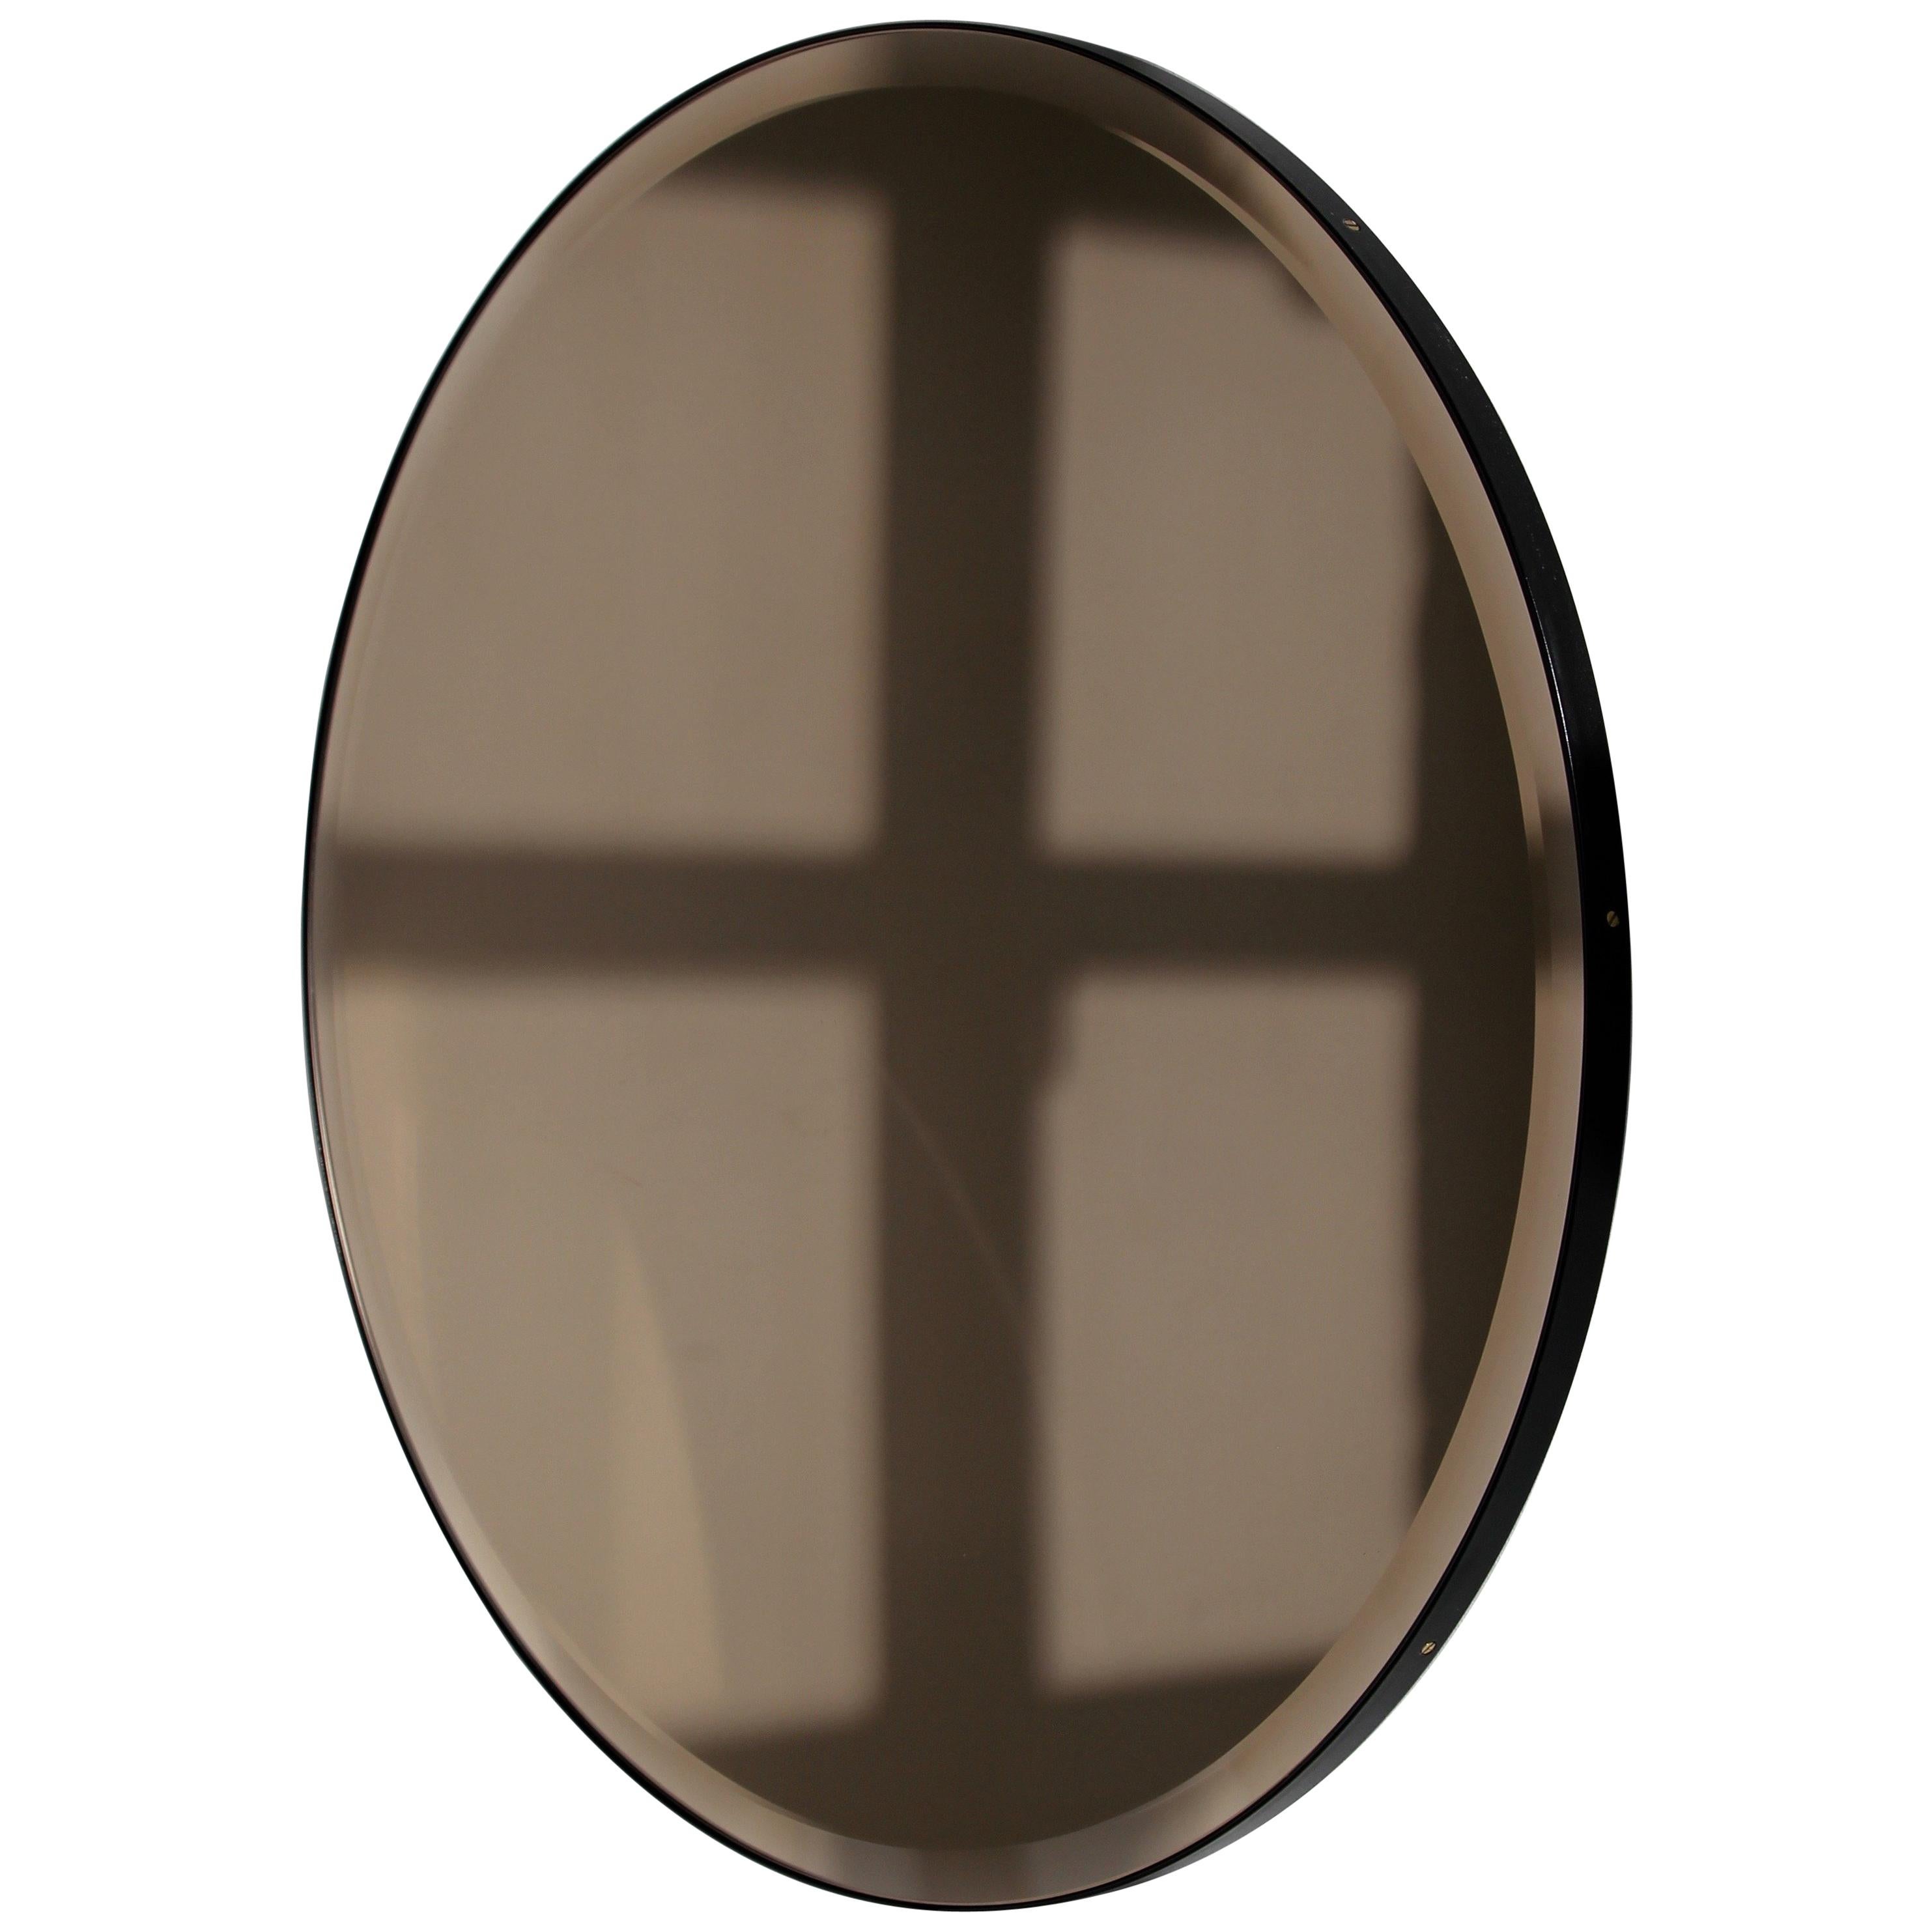 Decorative bevelled bronze tinted round mirror with an elegant aluminium powder coated black frame. Designed and handcrafted in London, UK.

Medium, large and extra-large mirrors (60, 80 and 100cm) are fitted with an ingenious French cleat (split